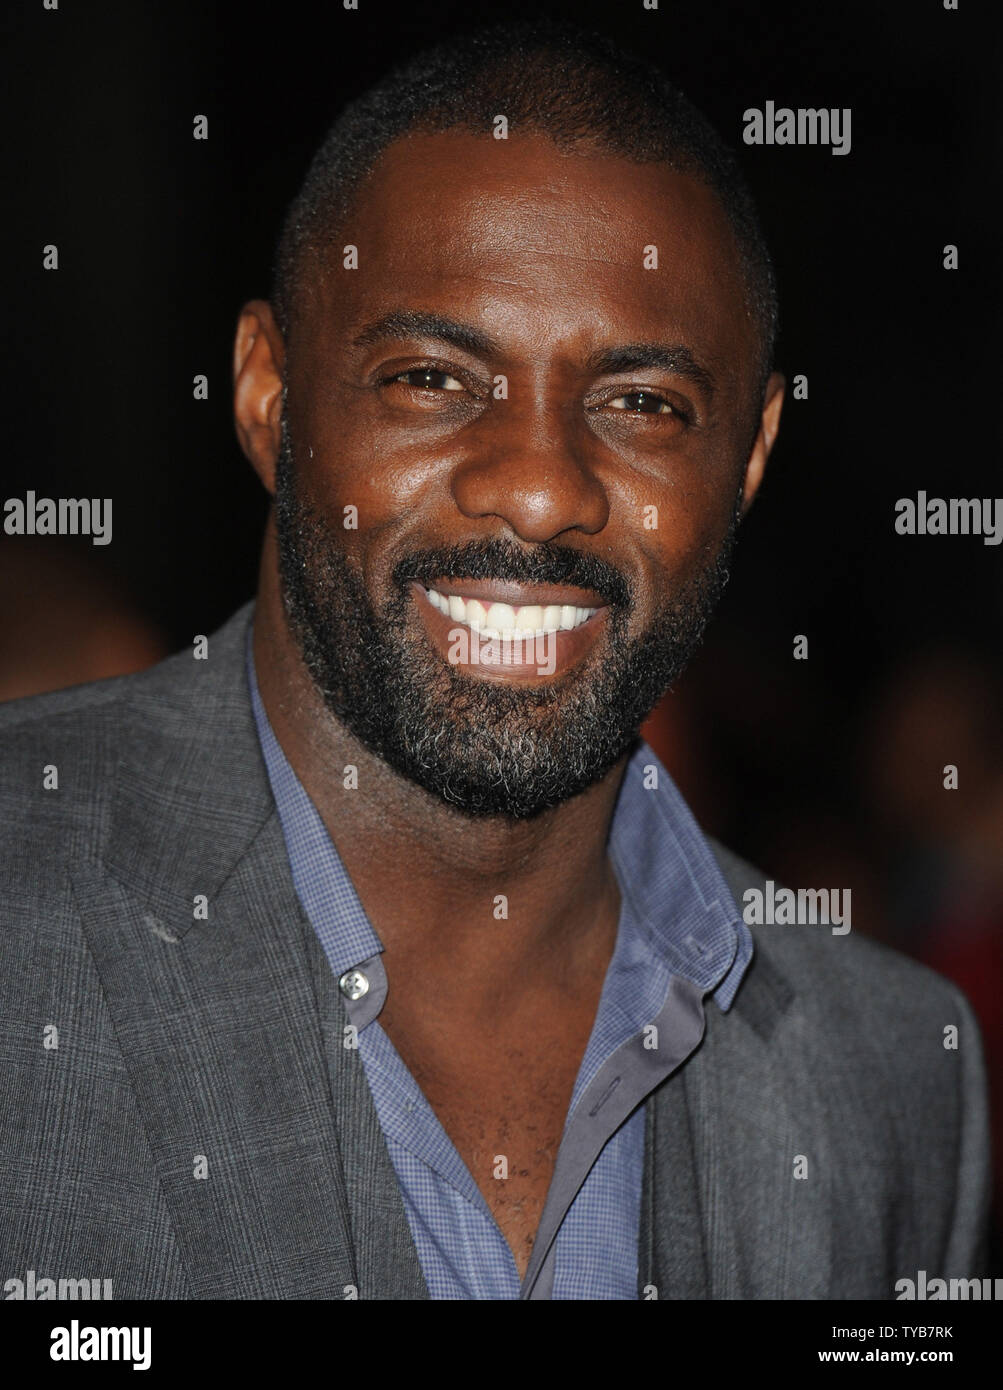 British actor Idris Elba attends the 'GQ Men Of The Year Awards' at Royal Opera House in London on September 6, 2011.     UPI/Rune Hellestad Stock Photo